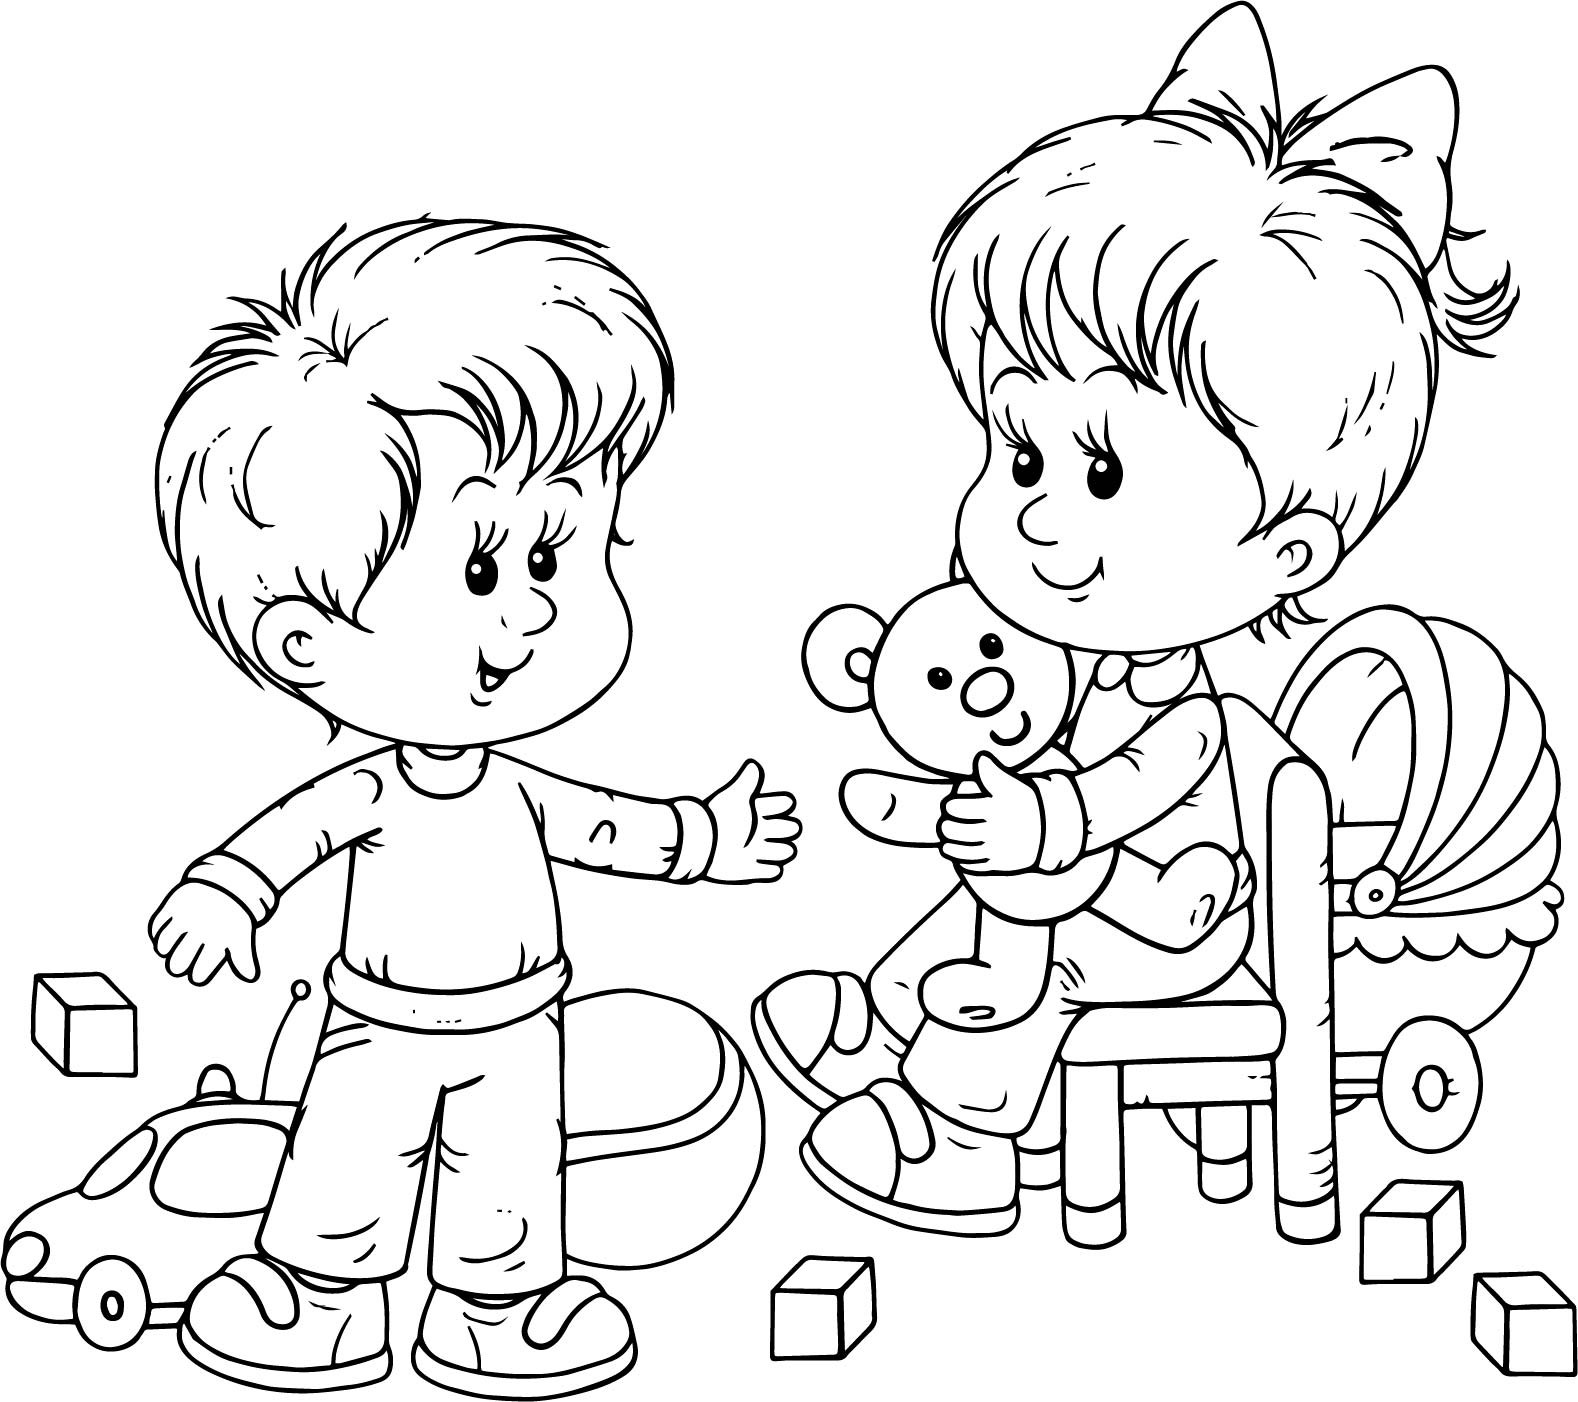 Coloring Pages Of Boys And Girls
 Preschool Boy And Girl Playing Toys Coloring Page